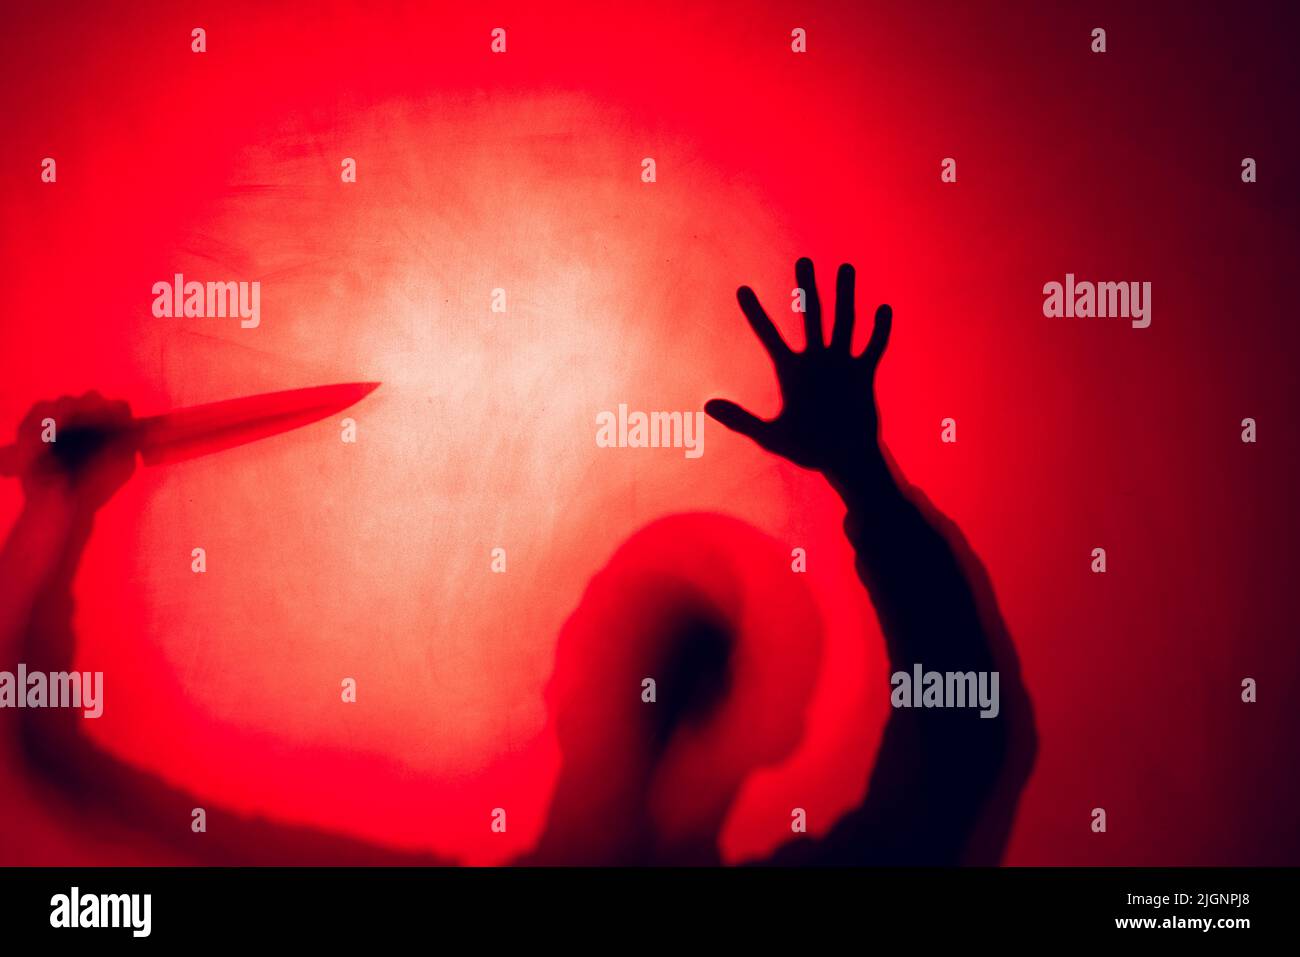 Composition of silhouette of man holding knife on red background Stock Photo